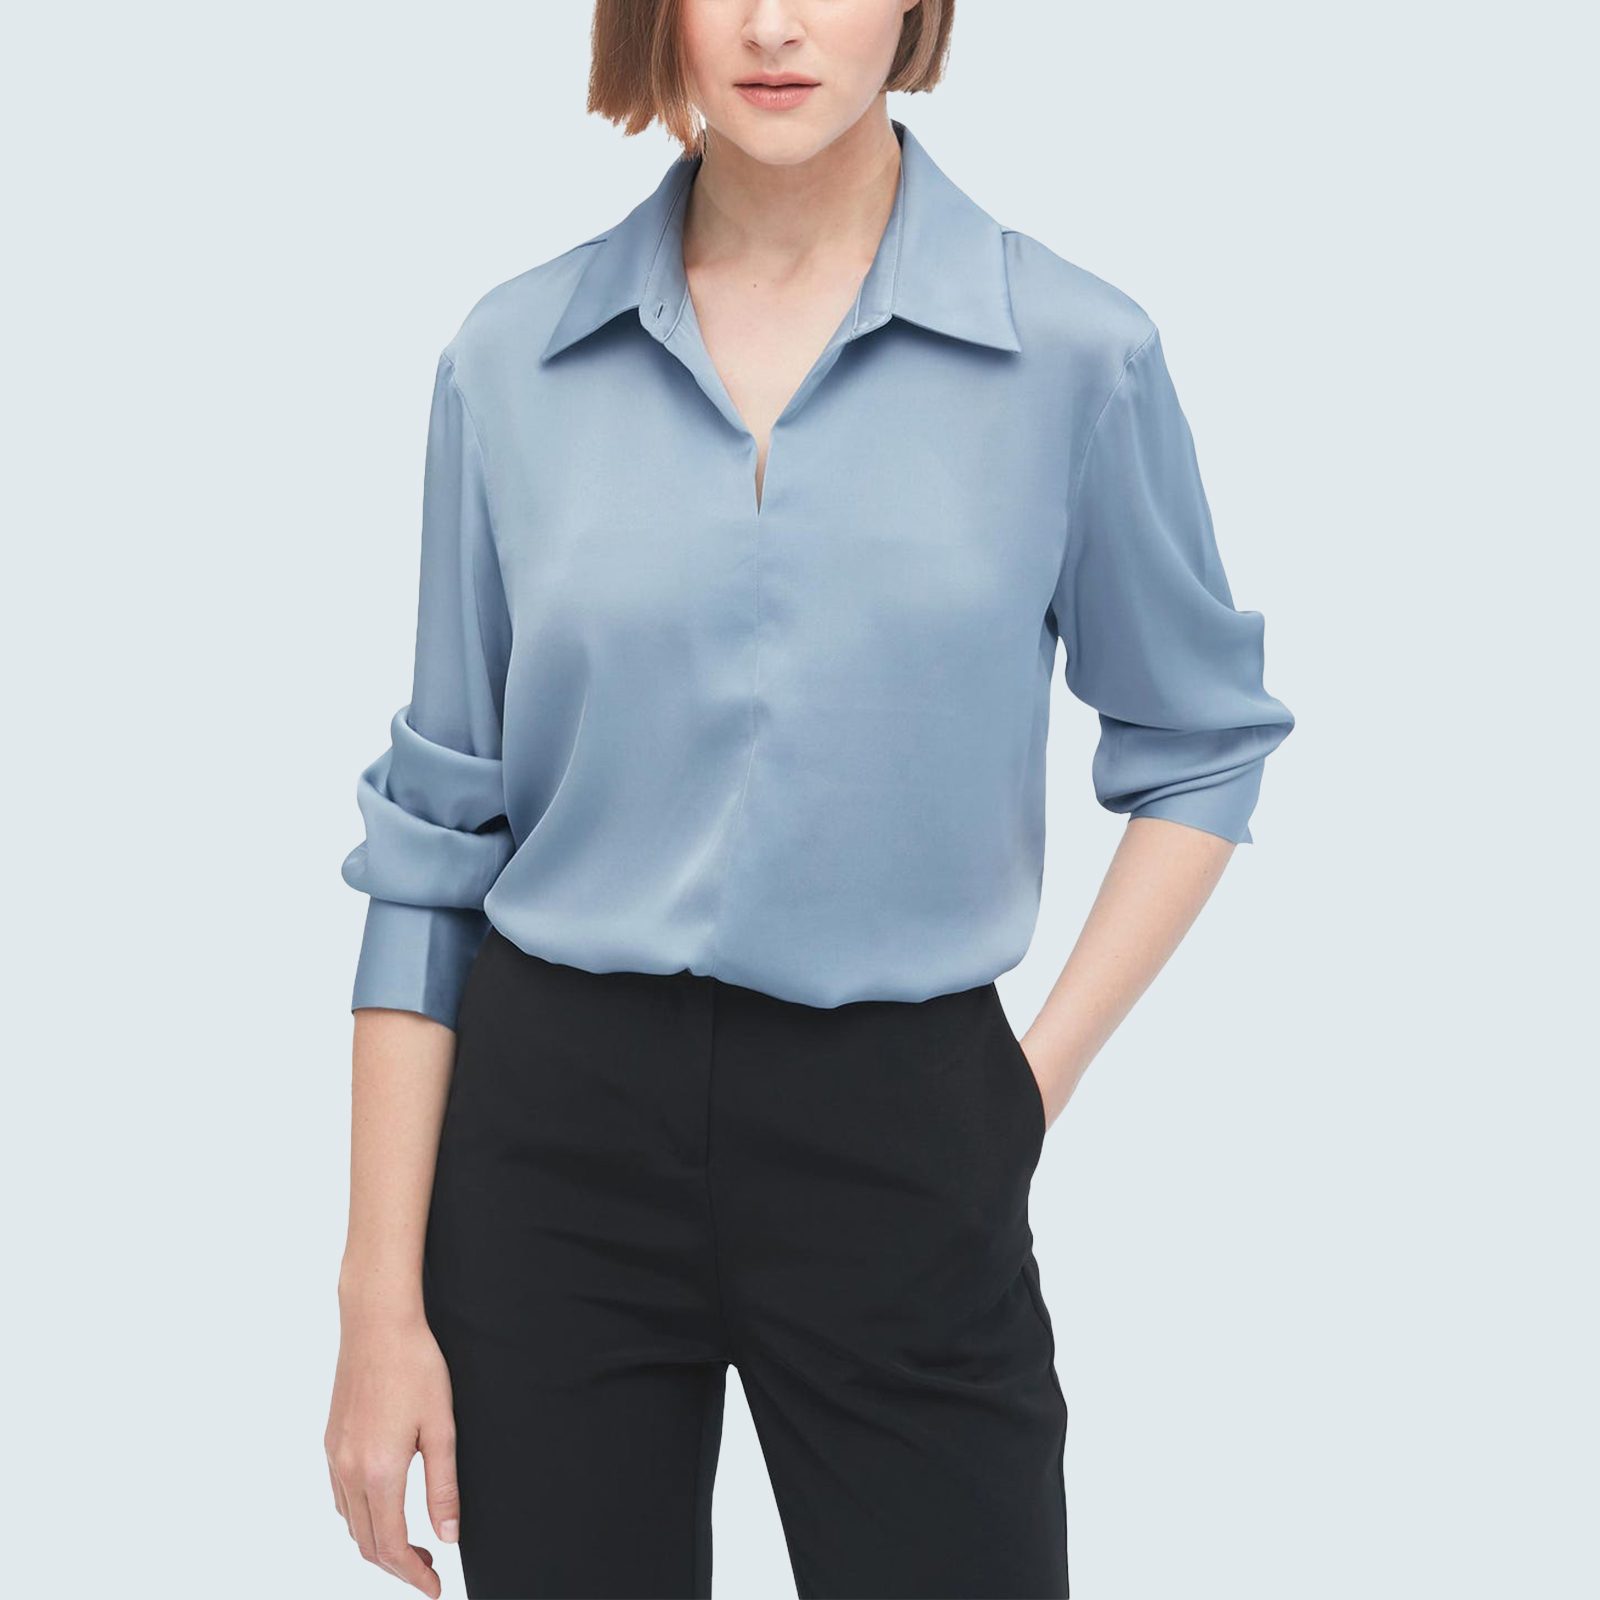 25 Best Work Tops for Women 2021 | Stylish Shirts for Video Calls & More